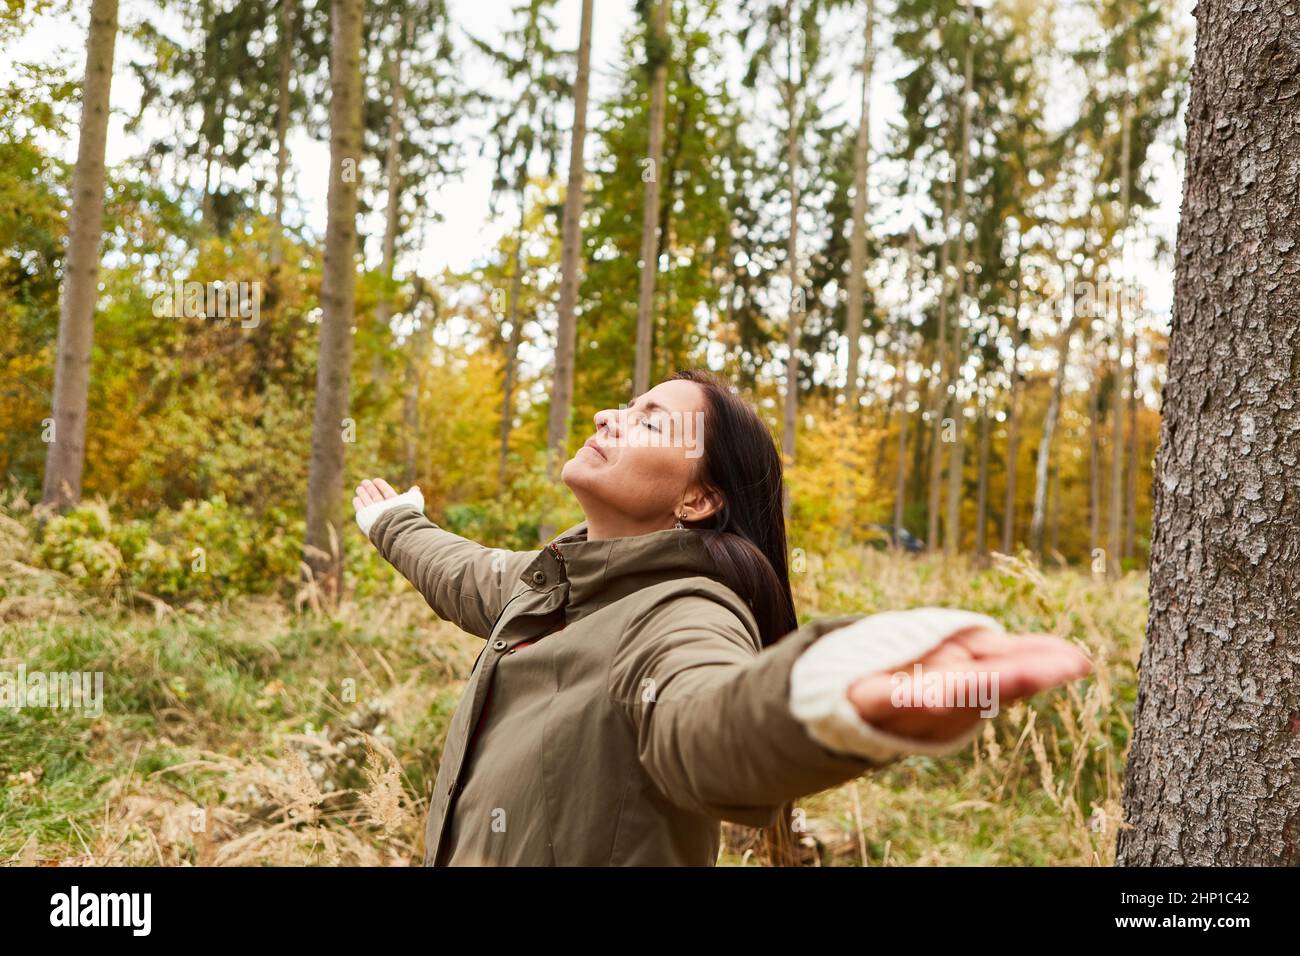 Relaxed woman doing calm breathing exercise in forest with arms outstretched Stock Photo